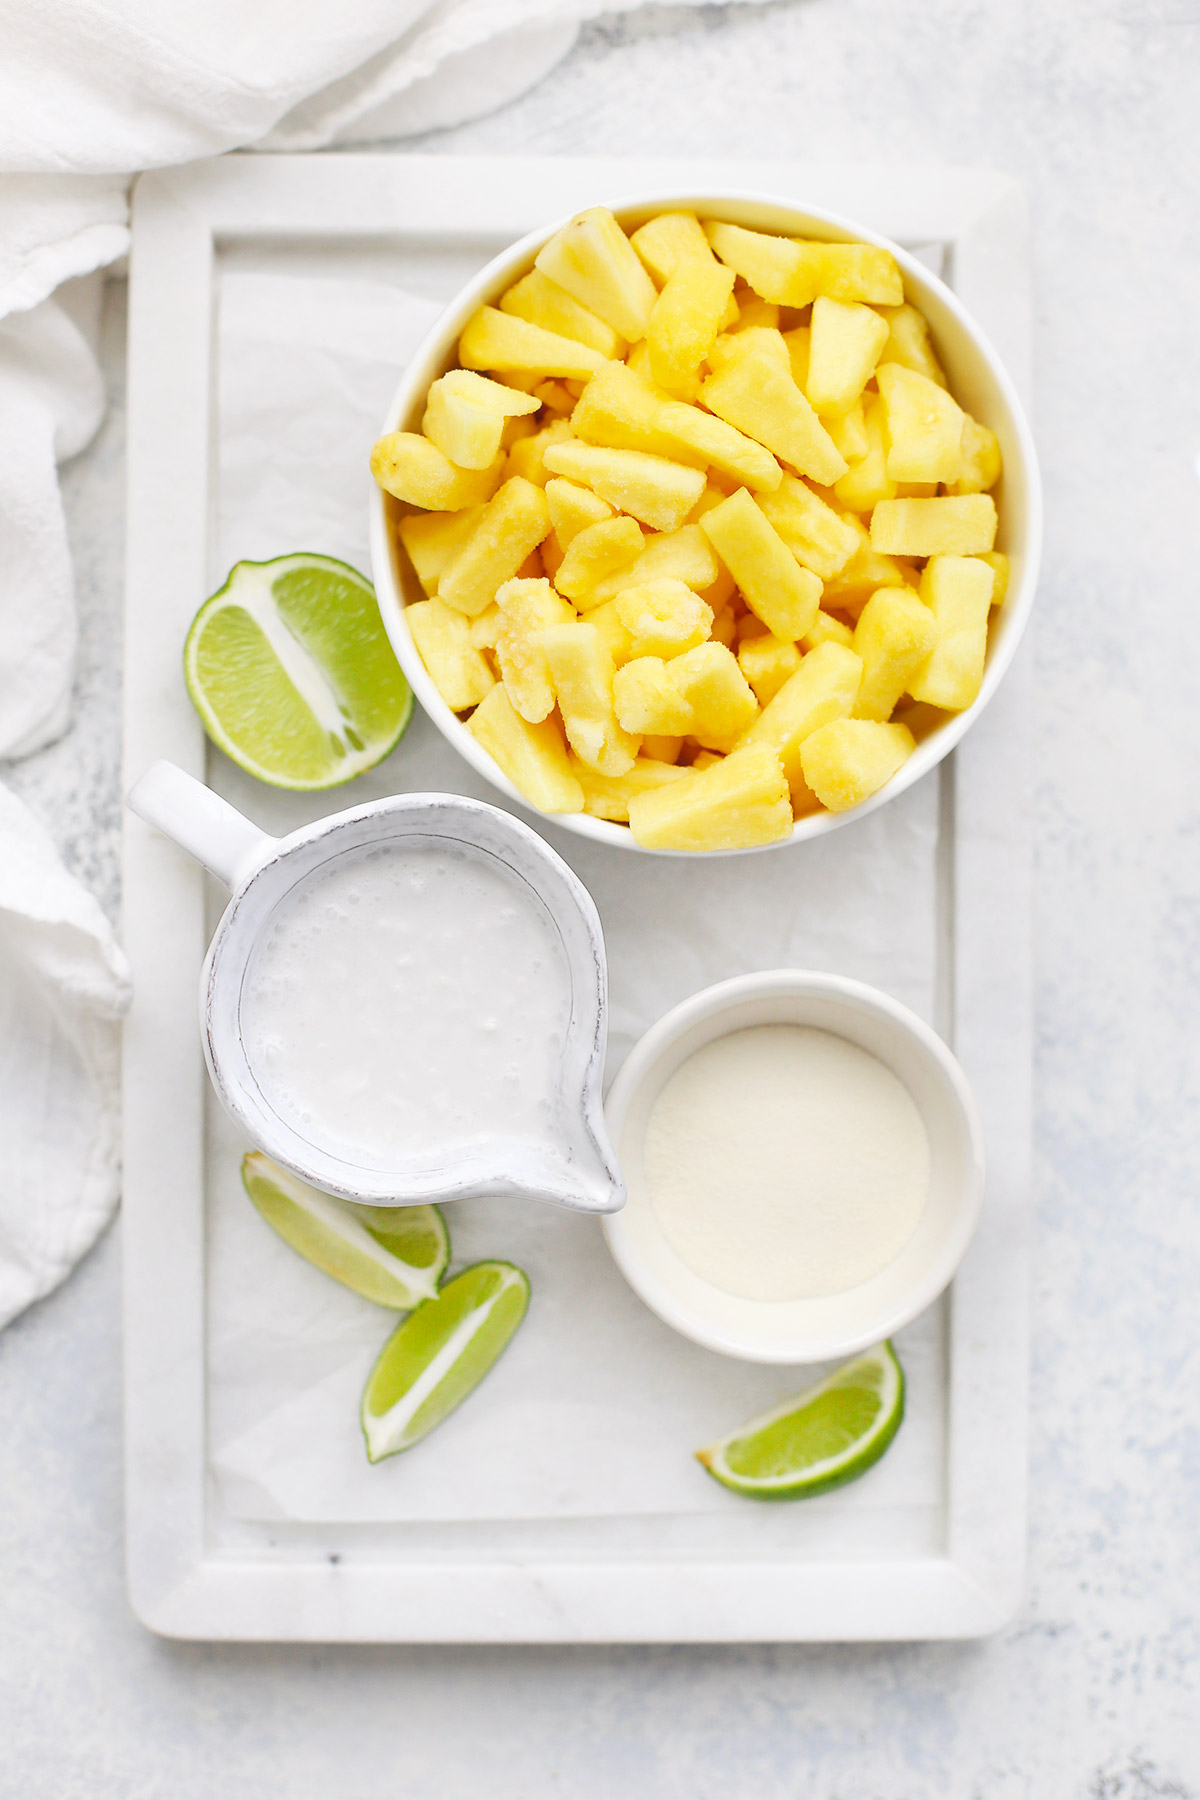 Paleo or Vegan Pineapple Coconut Lime Smoothie from One Lovely Life